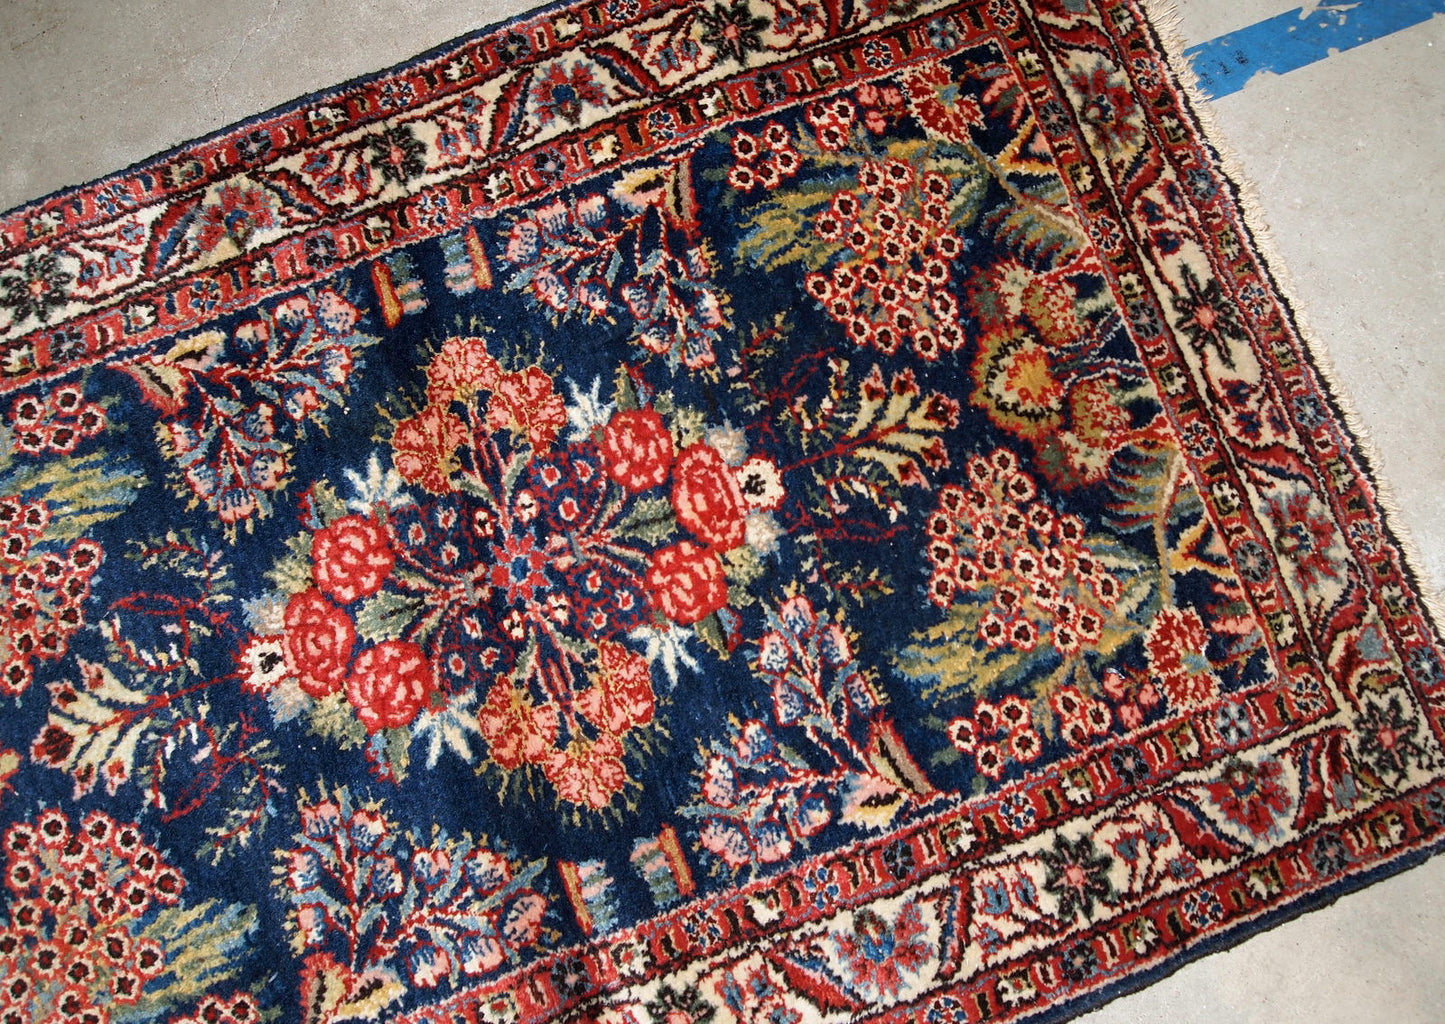 Handmade antique Hamadan rug from the beginning of 20th century. The rug is in original good condition made in bright shades and floral design.